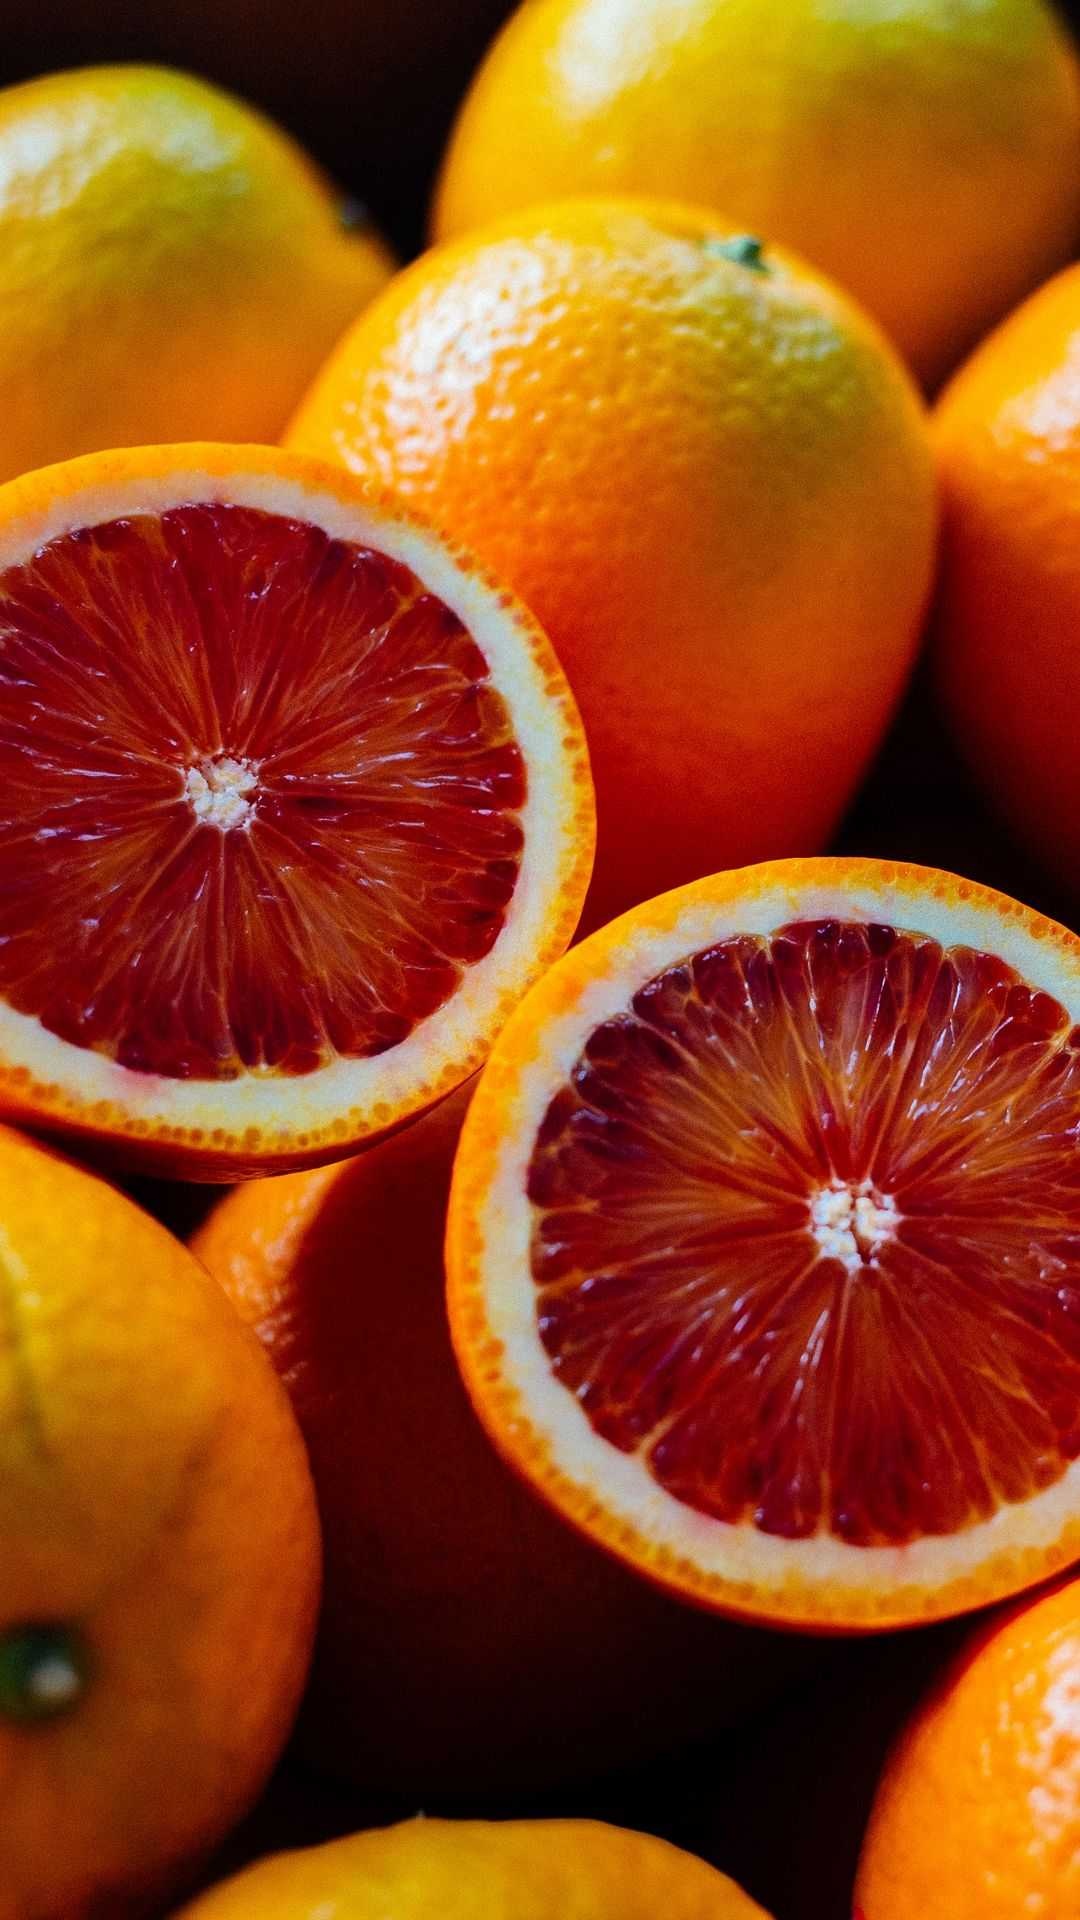 Orange: Consists of juice vesicles surrounded by a waxy skin, the peel. 1080x1920 Full HD Background.